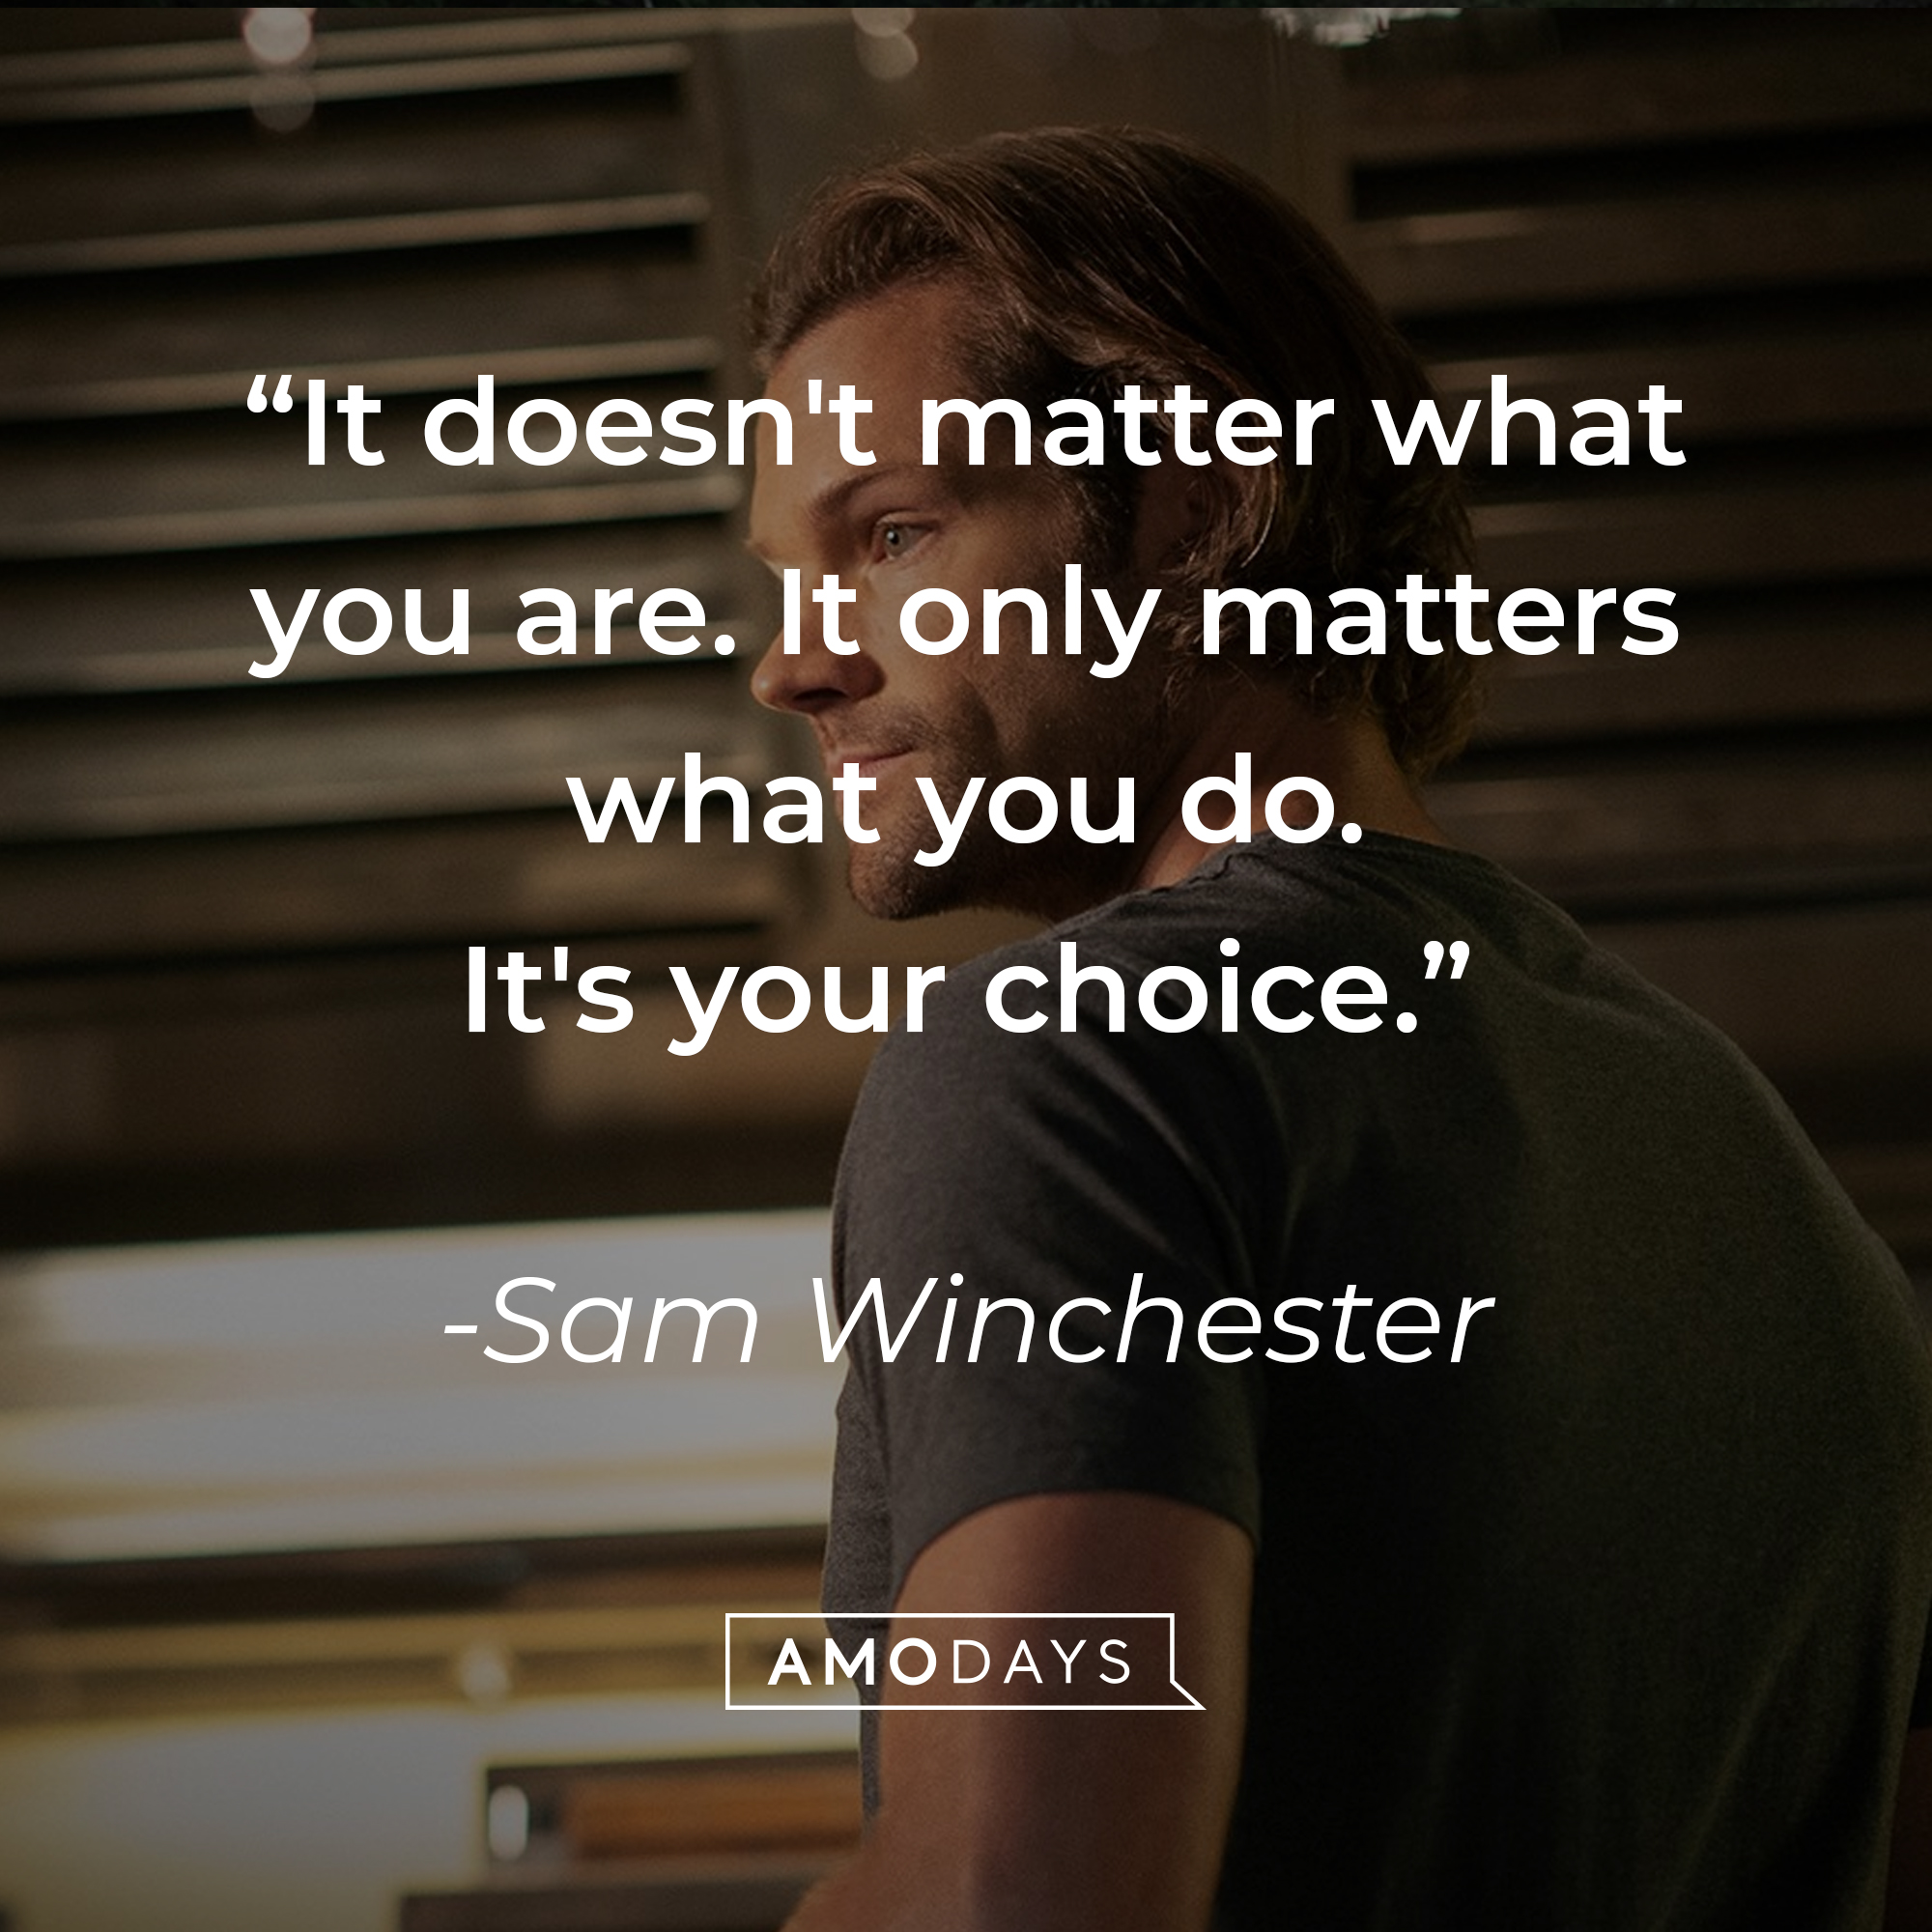 Sam Winchester's quote: "It doesn't matter what you are. It only matters what you do. It's your choice." | Source: Facebook.com/Supernatural